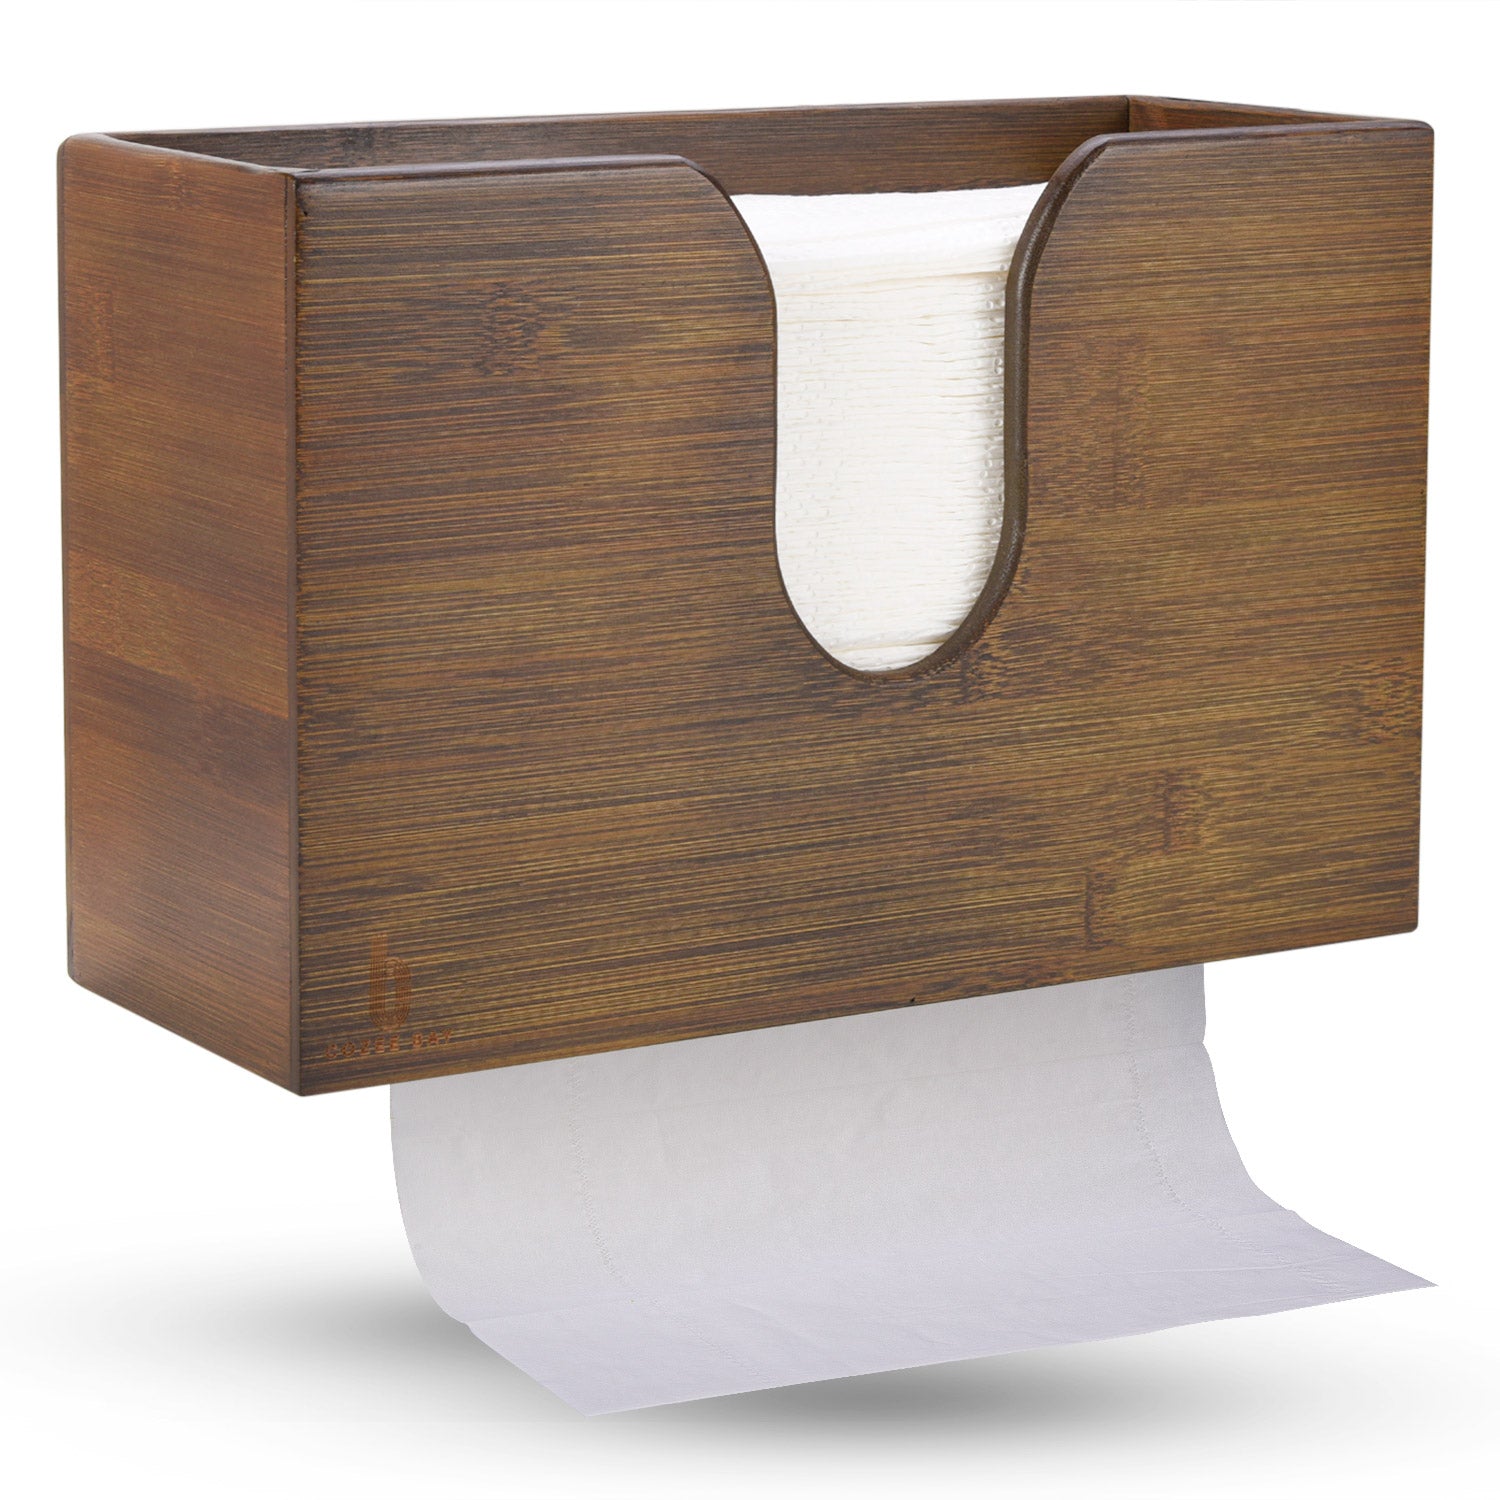 Cozee Bay Paper Towel Dispenser for Kitchen & Bathroom (Natural Bamboo)